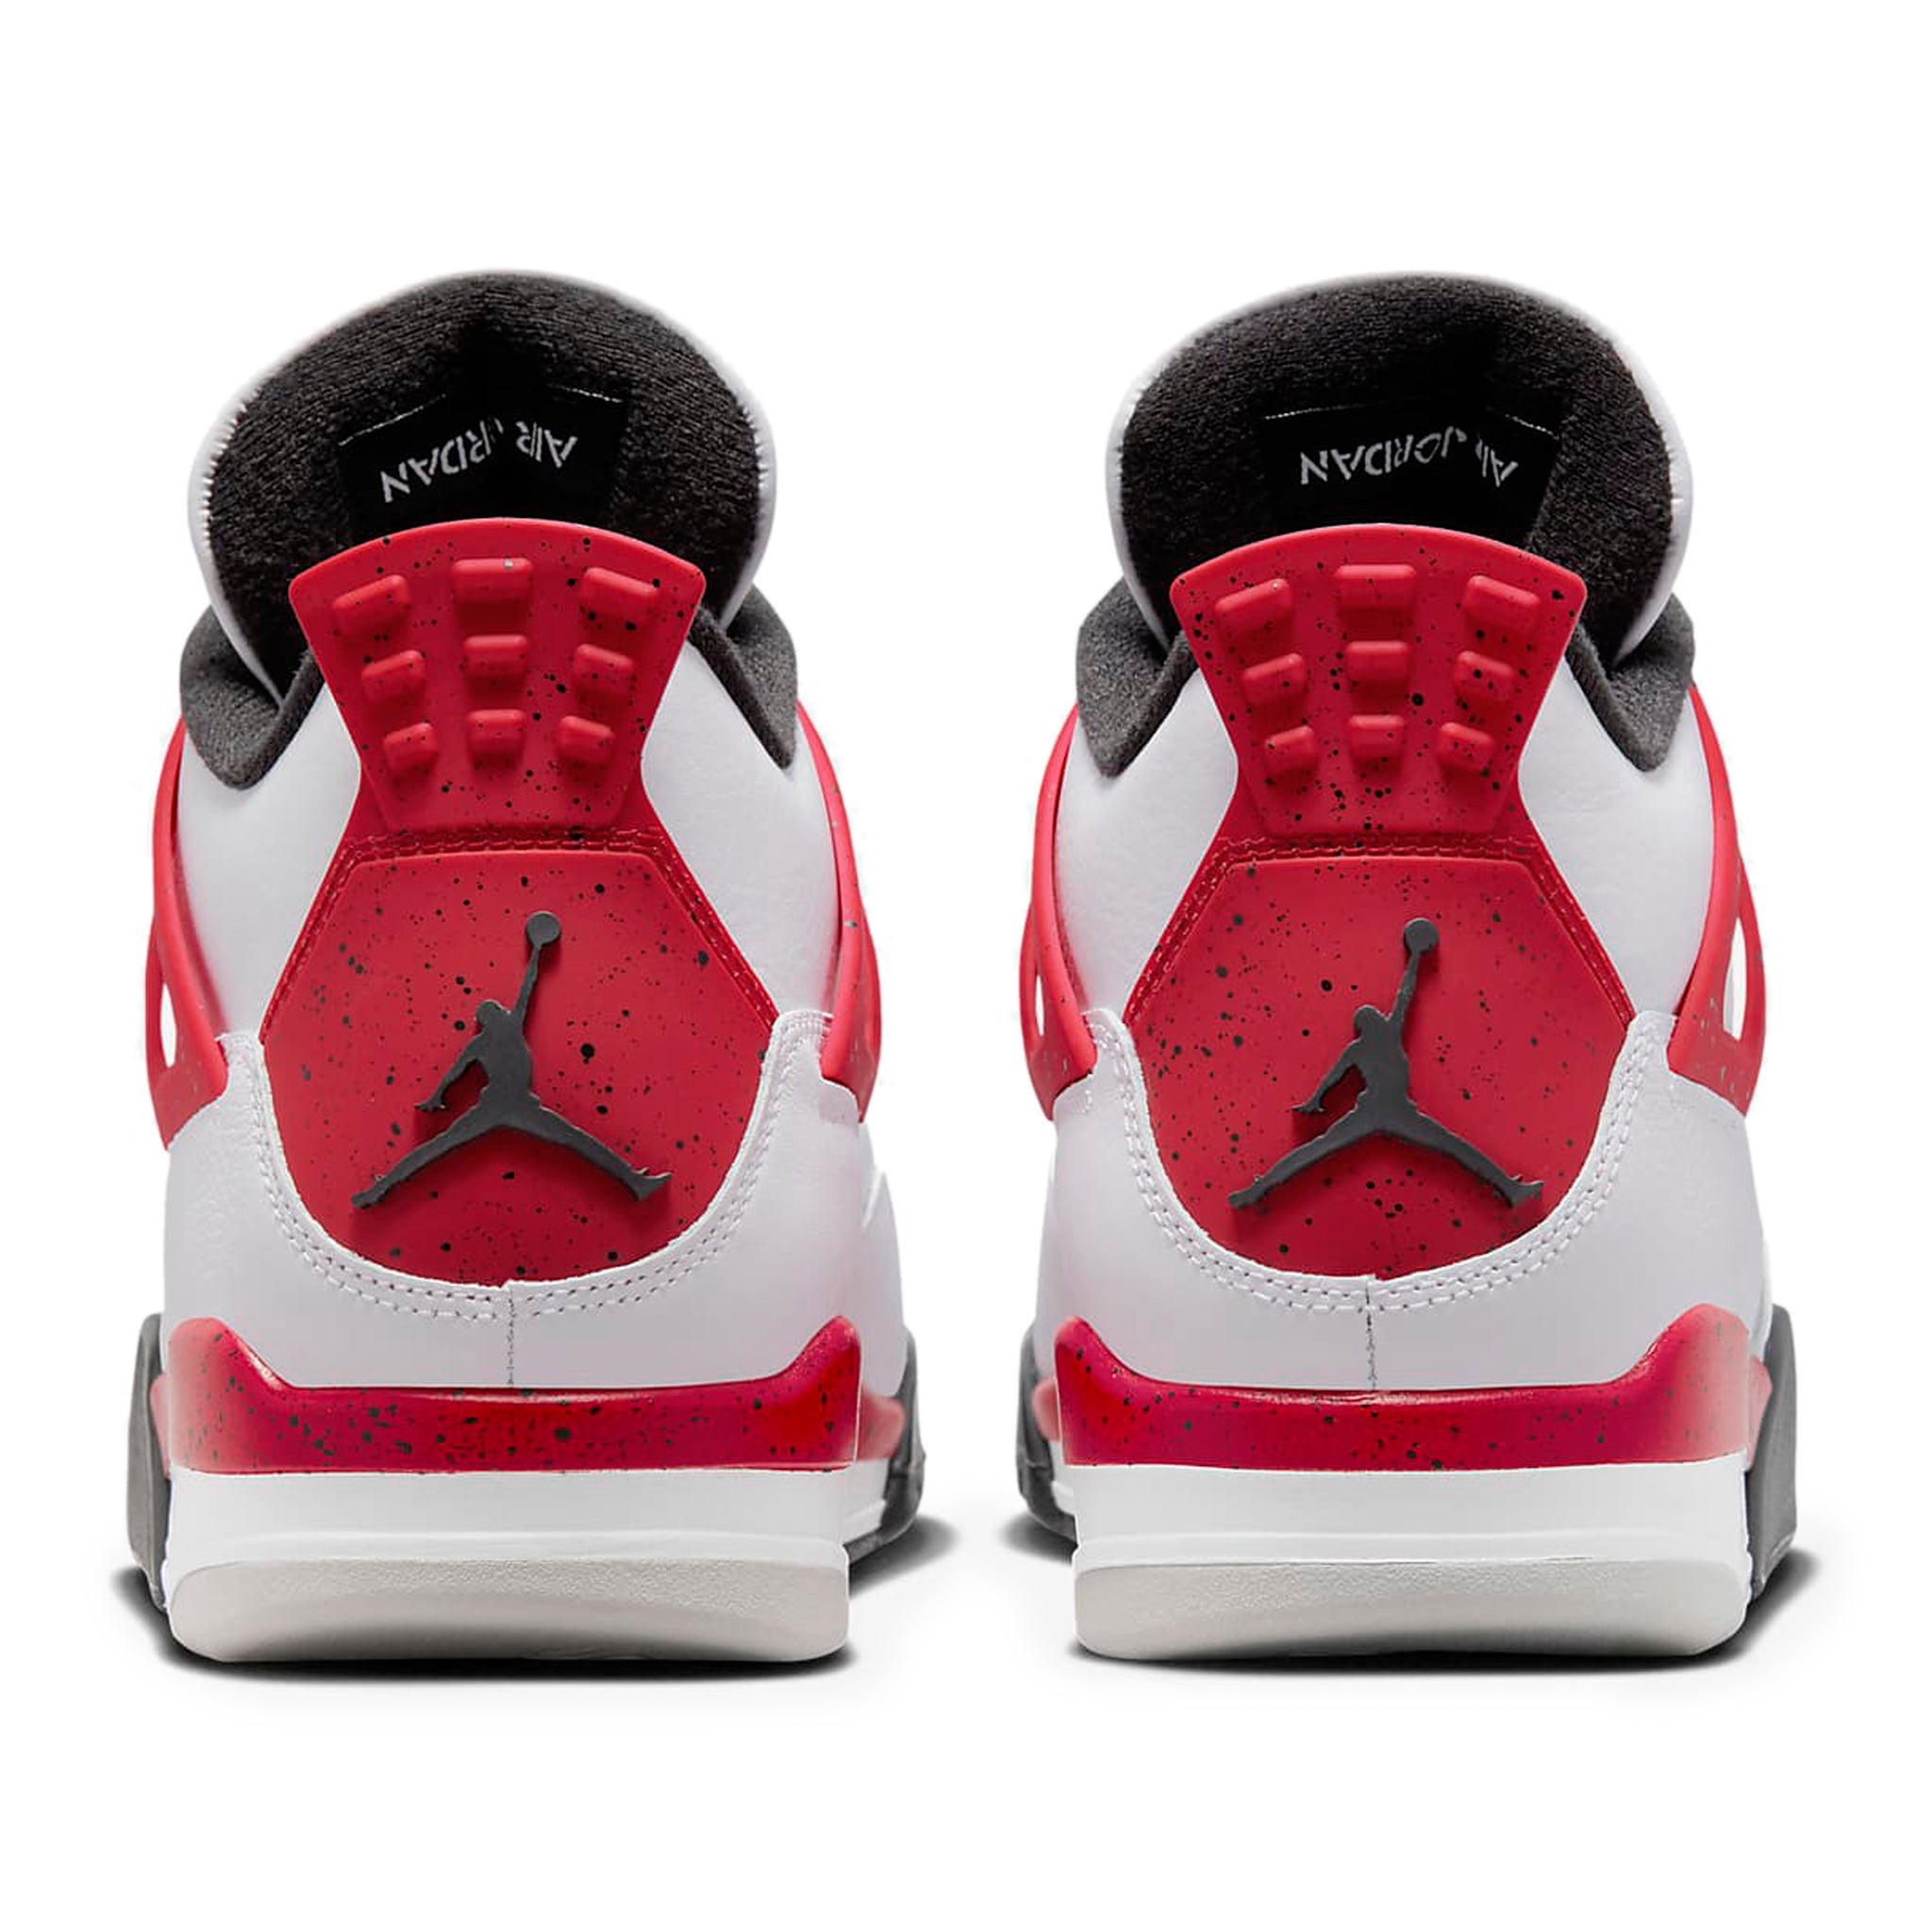 Back view of Air Jordan 4 Retro Red Cement (2023) DH6927-161